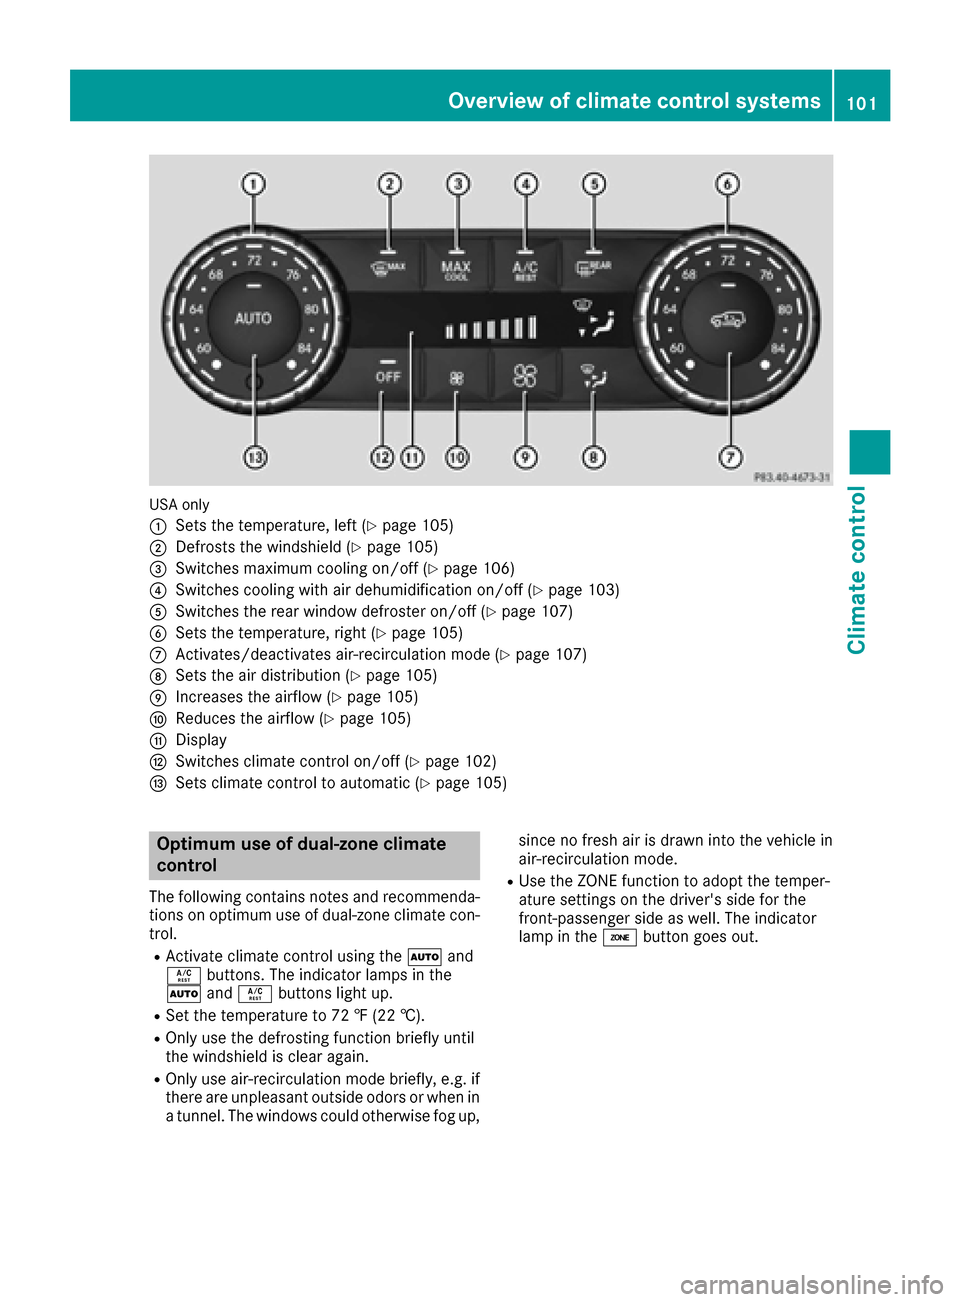 MERCEDES-BENZ G-Class 2016 W463 Owners Manual USA only
:
Sets the temperature, left (Ypage 105)
;Defrosts the windshield (Ypage 105)
=Switches maximum cooling on/off (Ypage 106)
?Switches cooling with air dehumidification on/off (Ypage 103)
ASwit